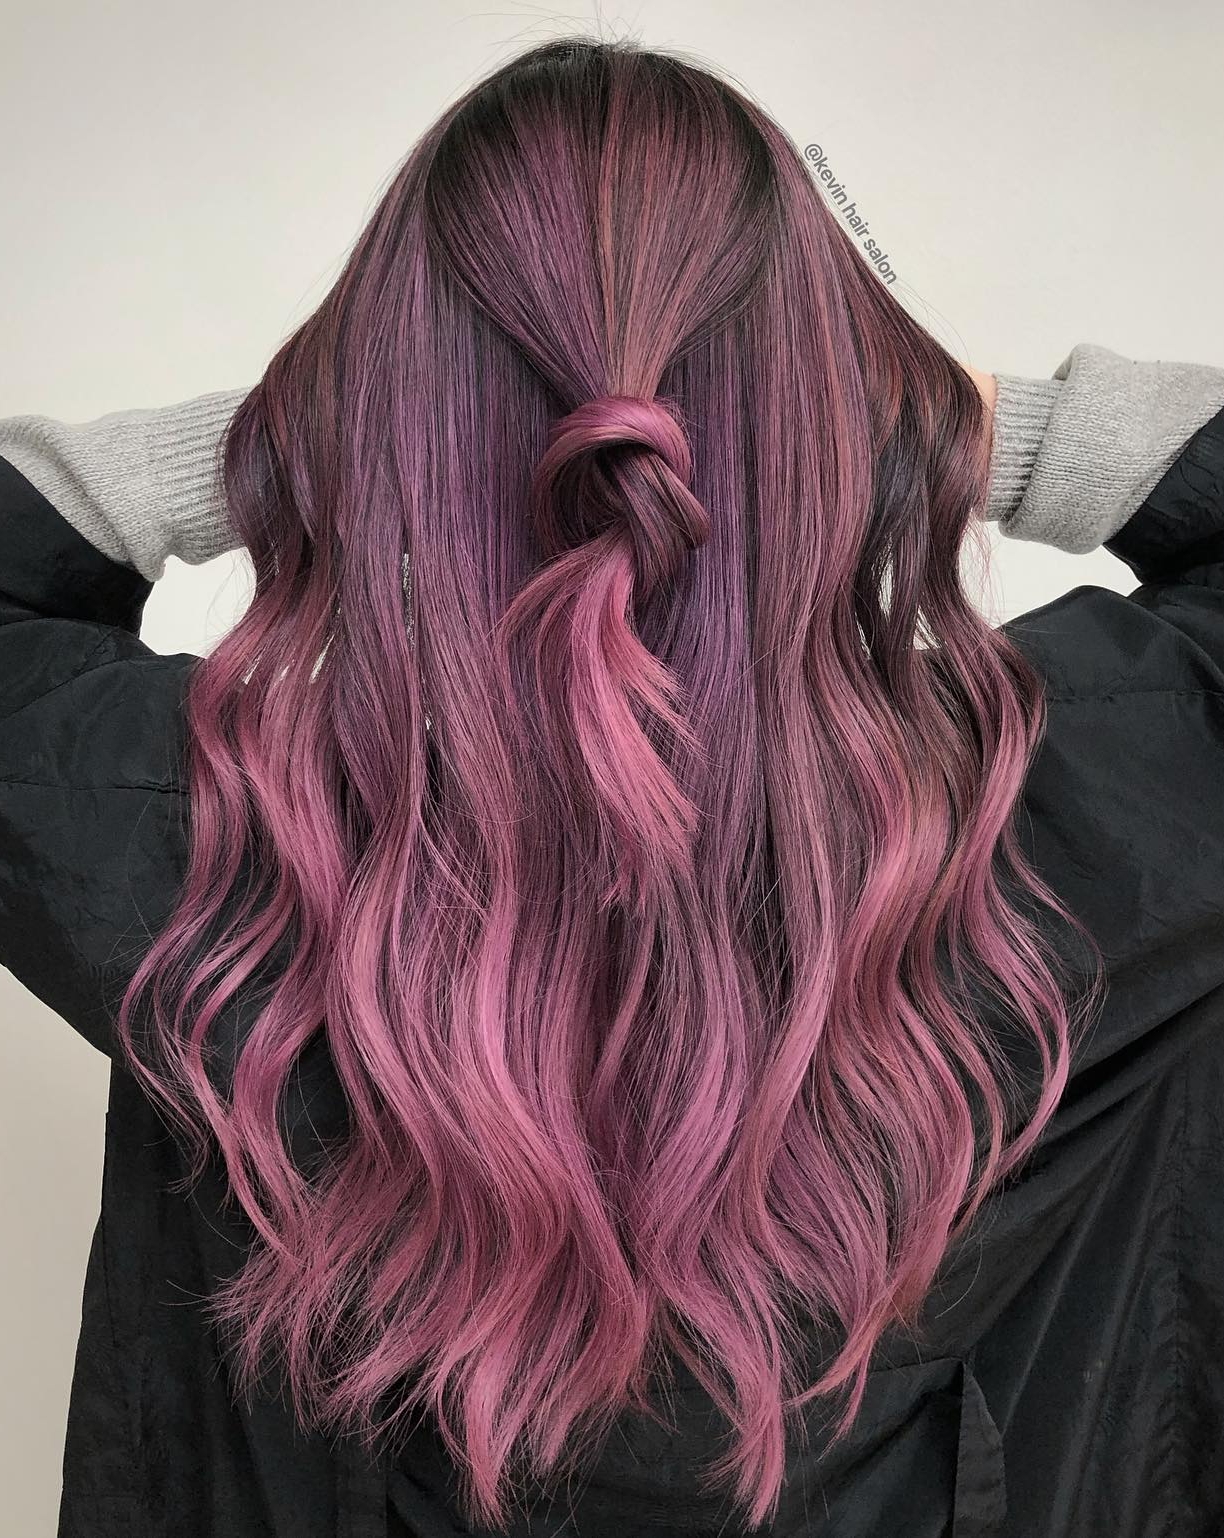 Dusty Pink Color on Long Hair